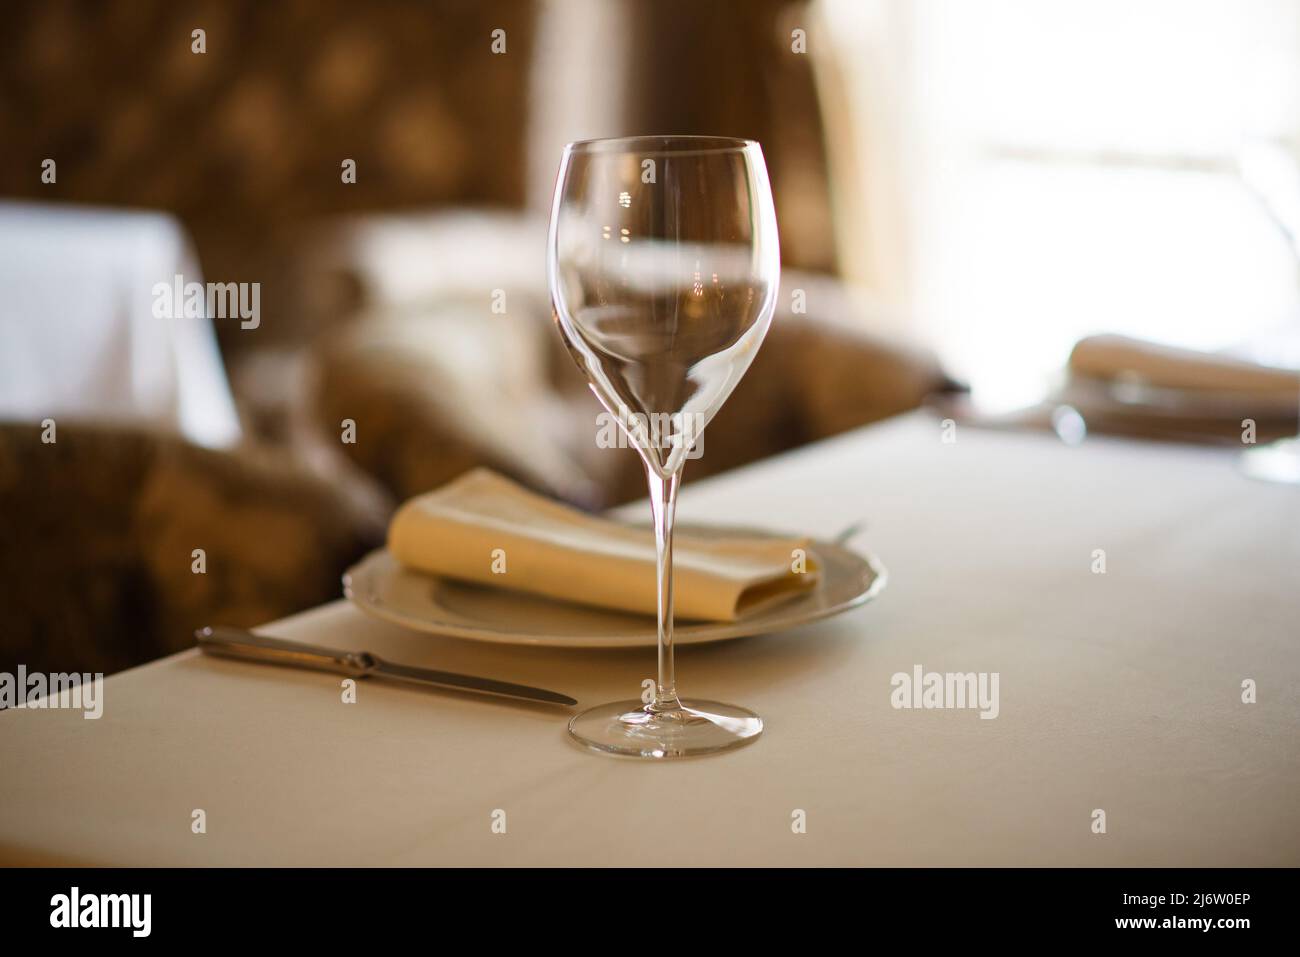 Table setting with an empty glass for wine Stock Photo